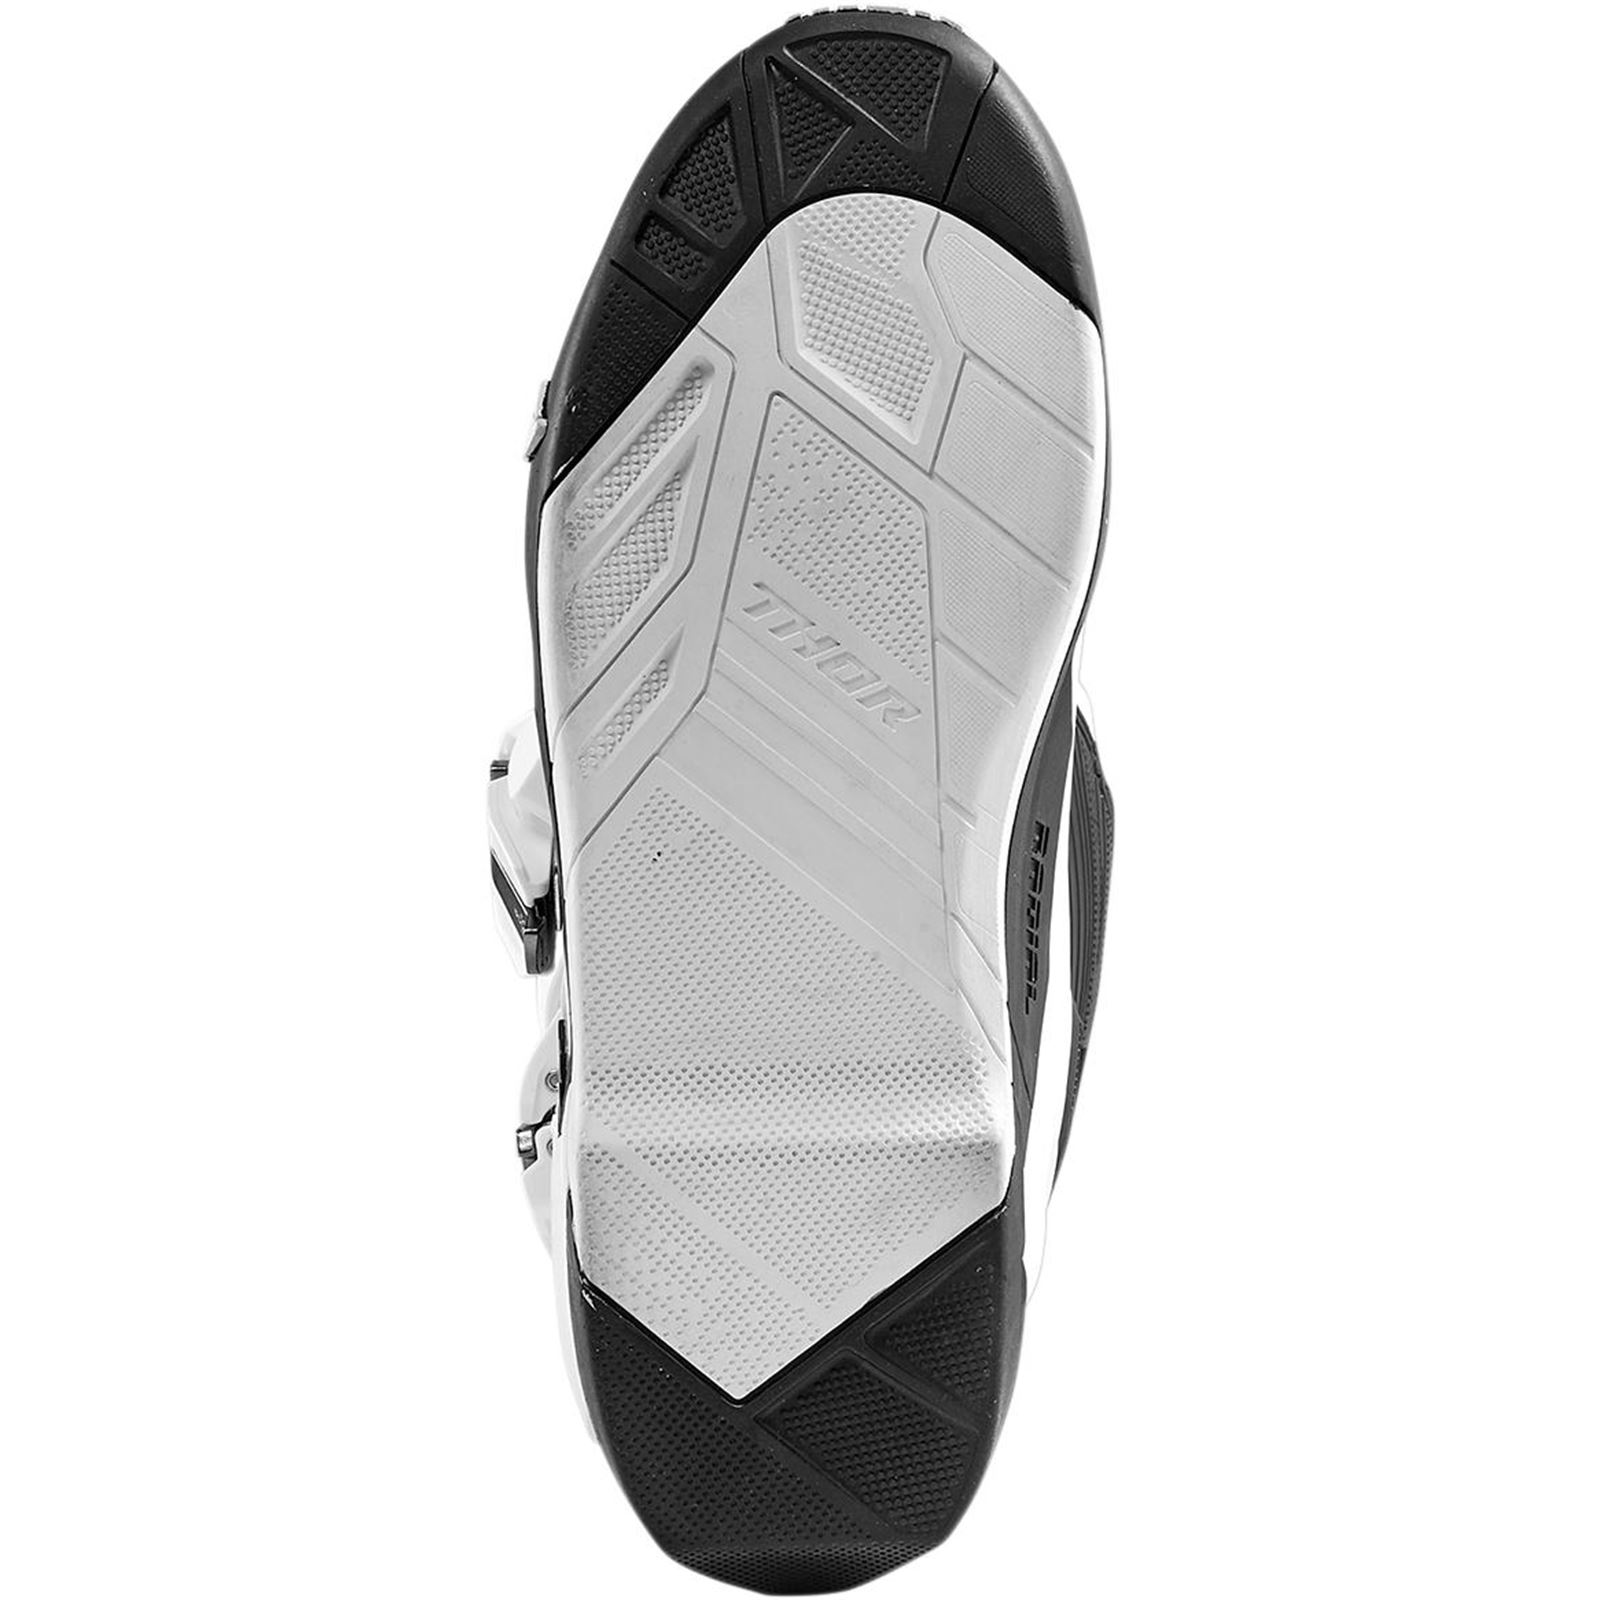 Thor Radial Boots Replacement Outsoles Black/White - 7-8